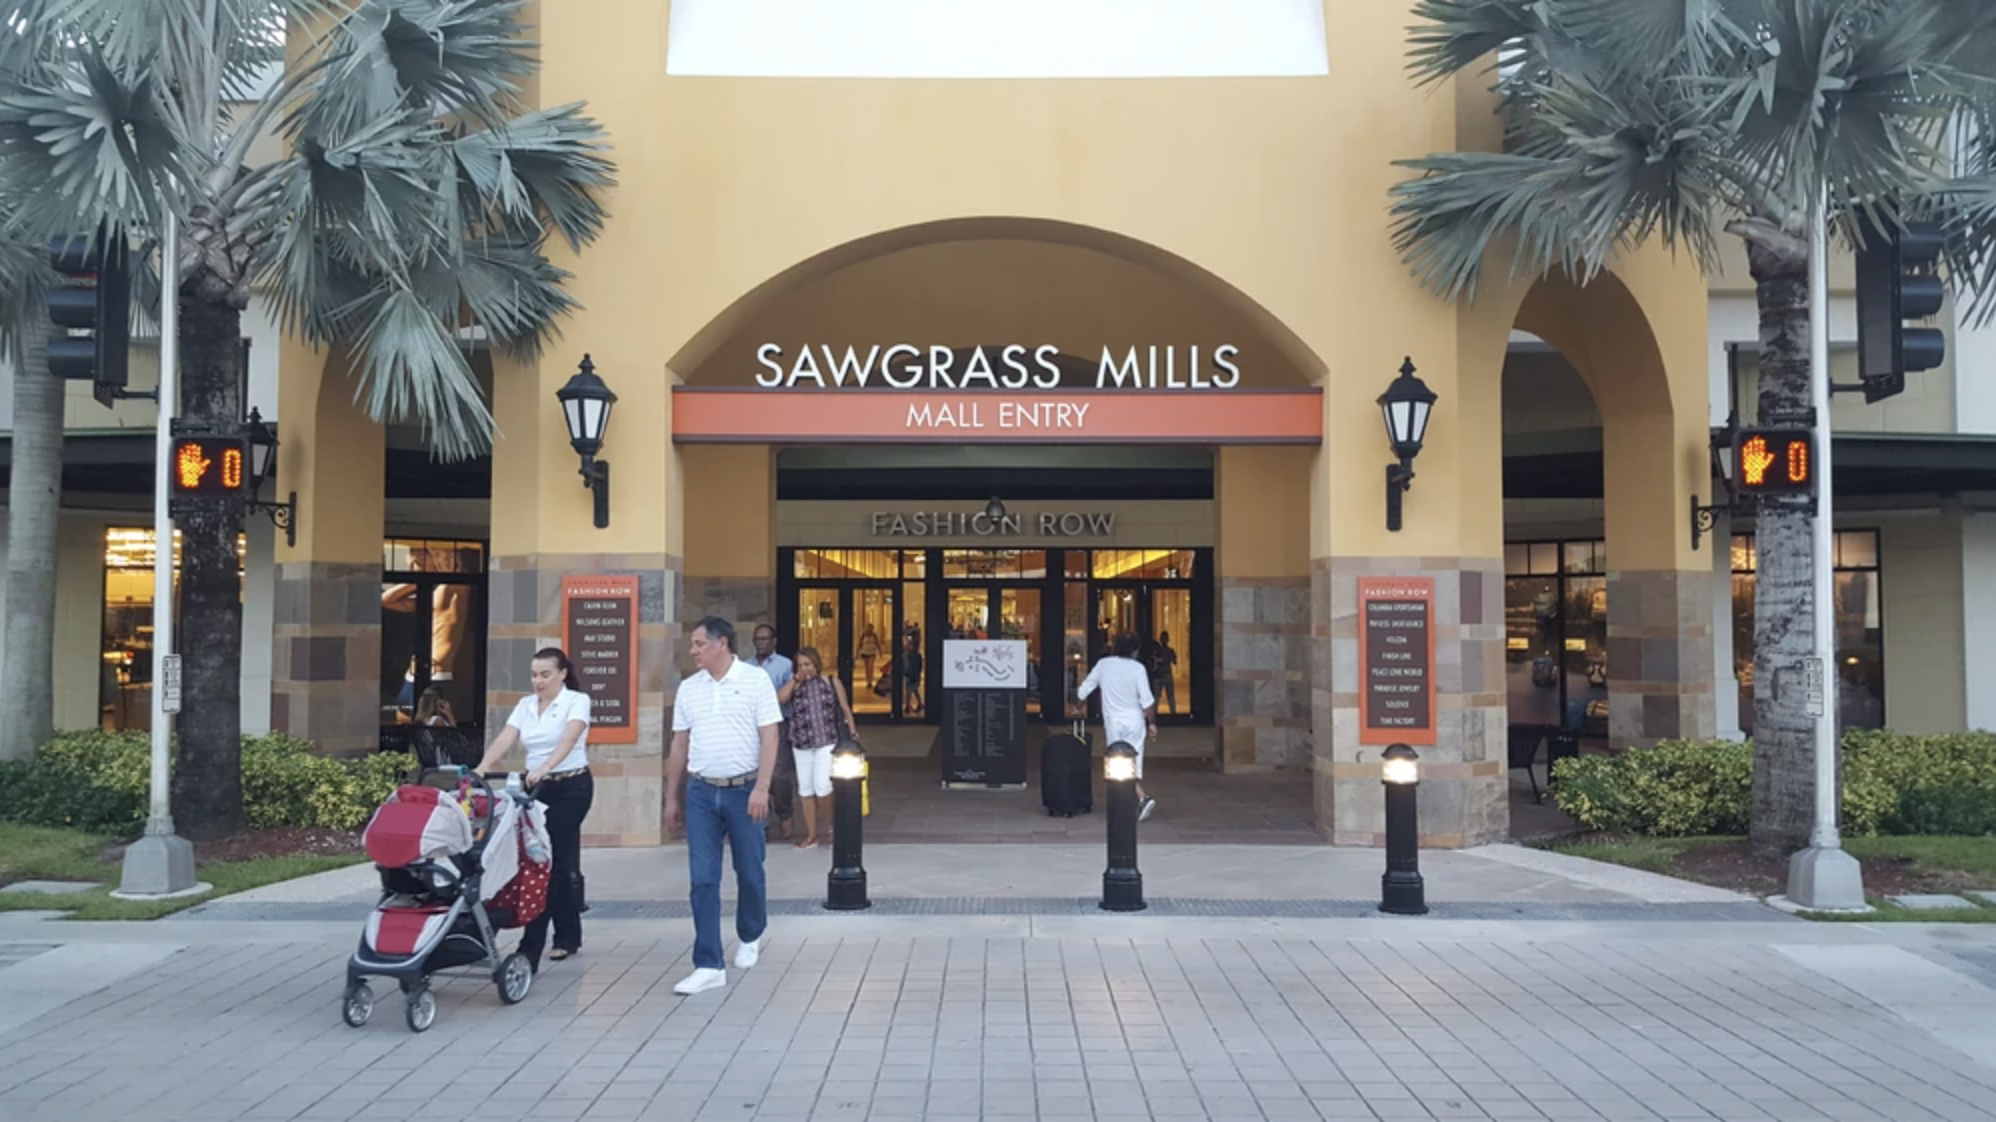 40 minutes from downtown Miami, you can't miss the opportunity to shop at Sawgrass Mall, one of the largest in the country.